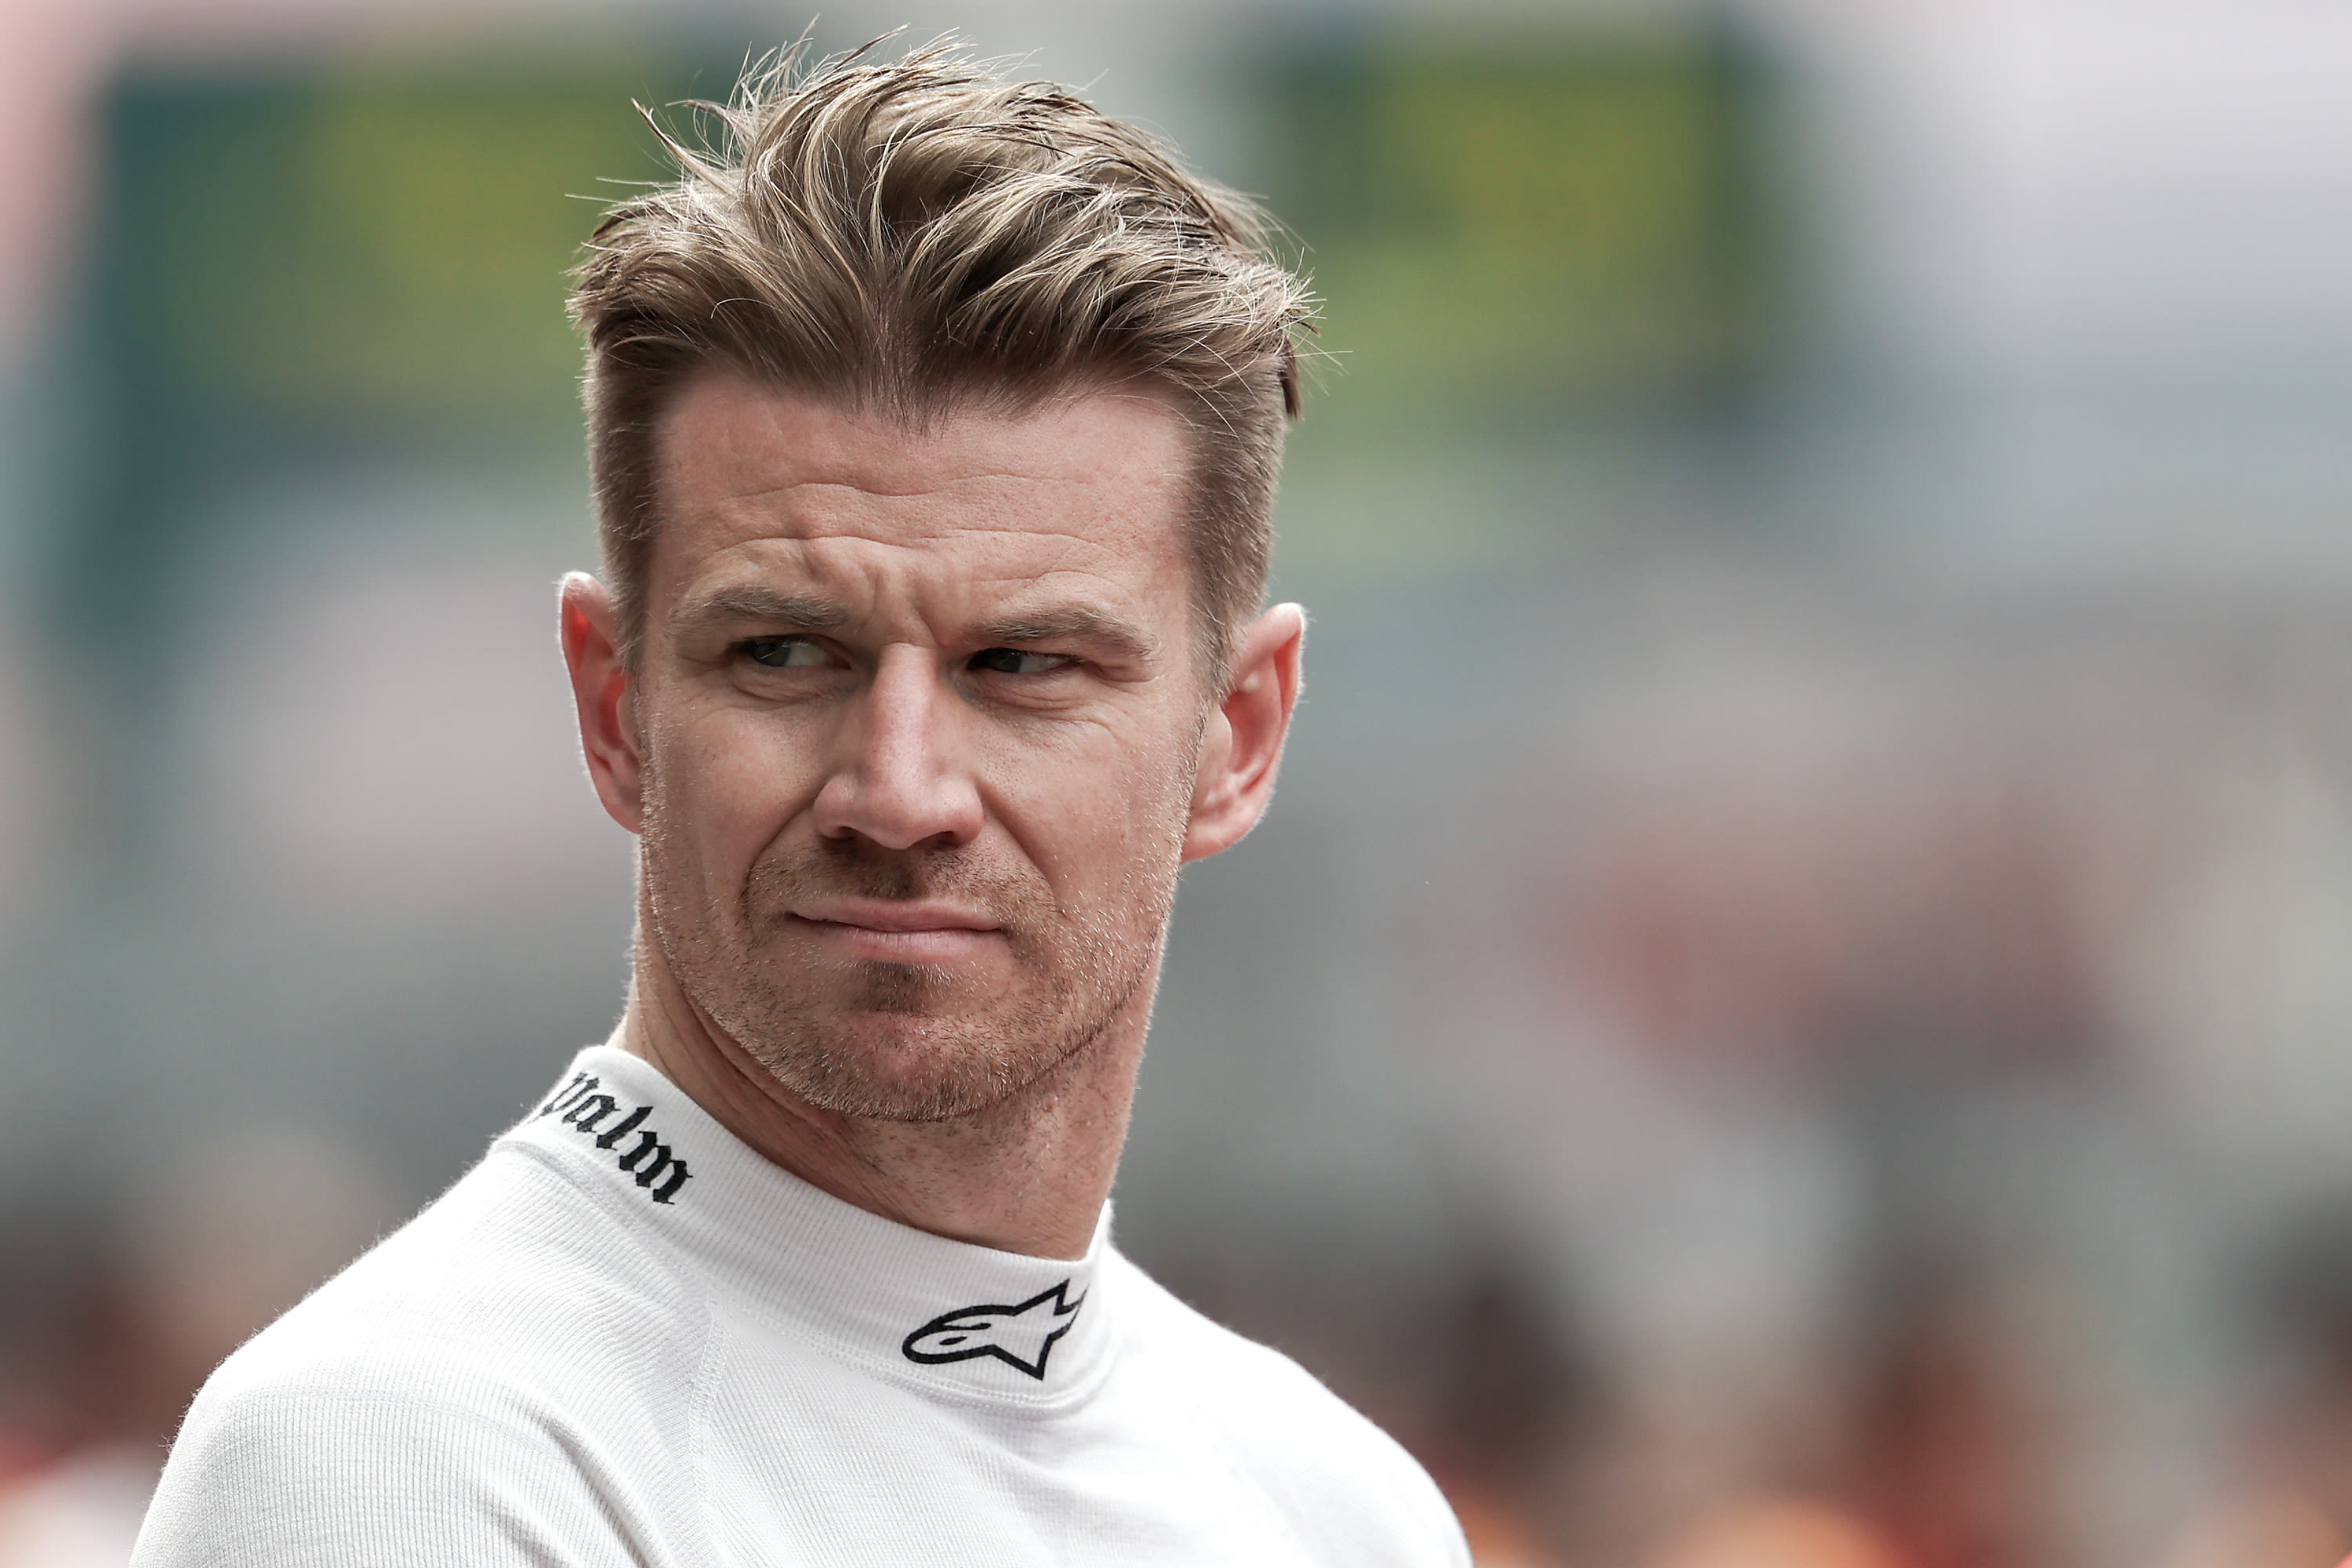 Audi has signed this driver for its Formula One entry